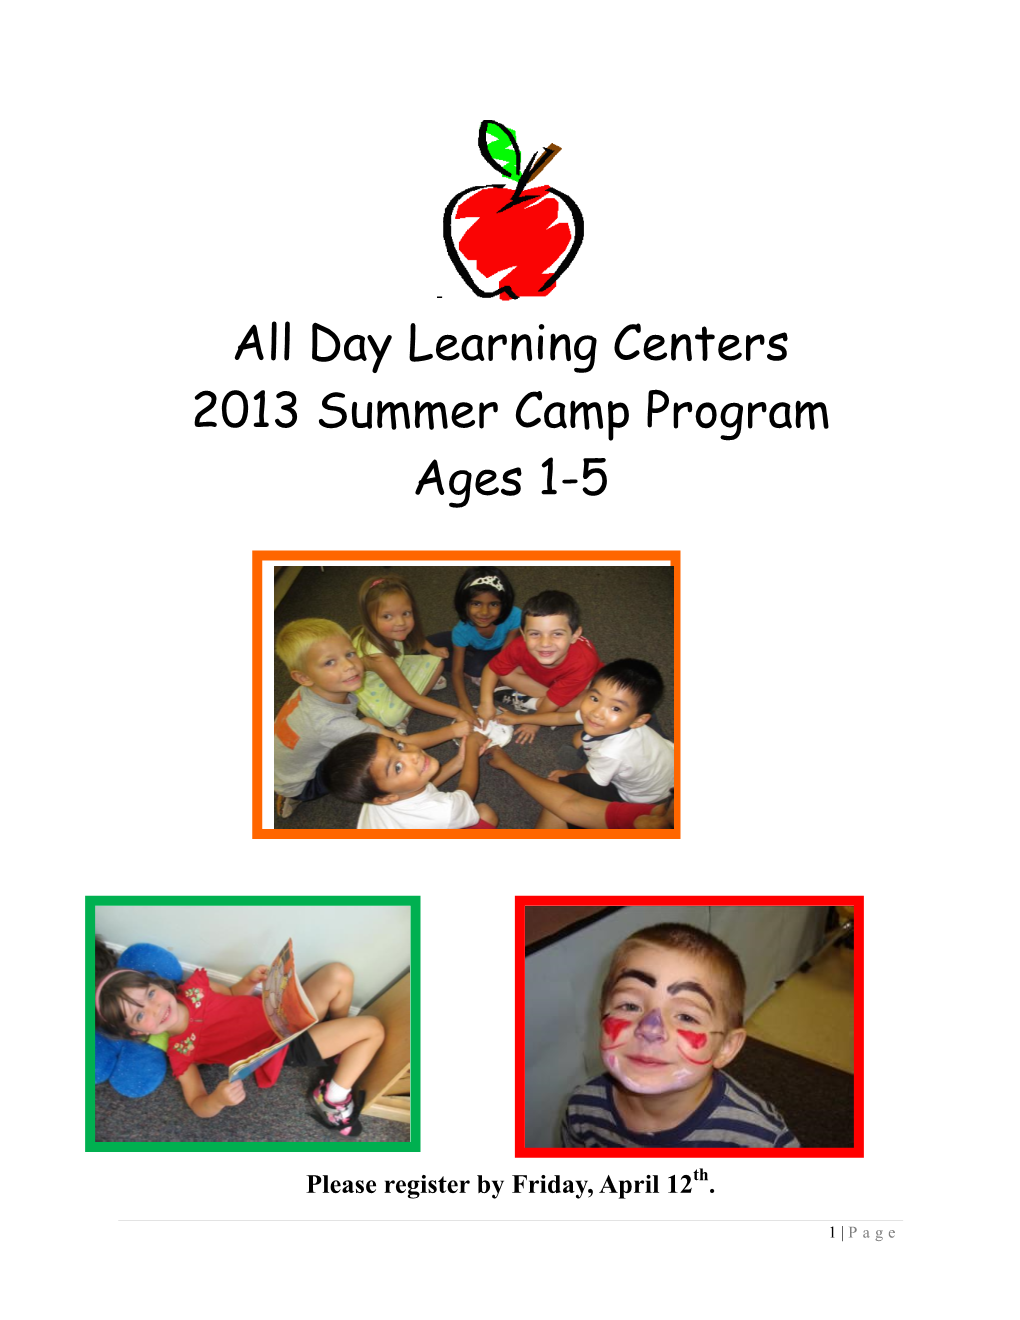 All Day Learning Centers 2013 Summer Camp Program Ages 1-5